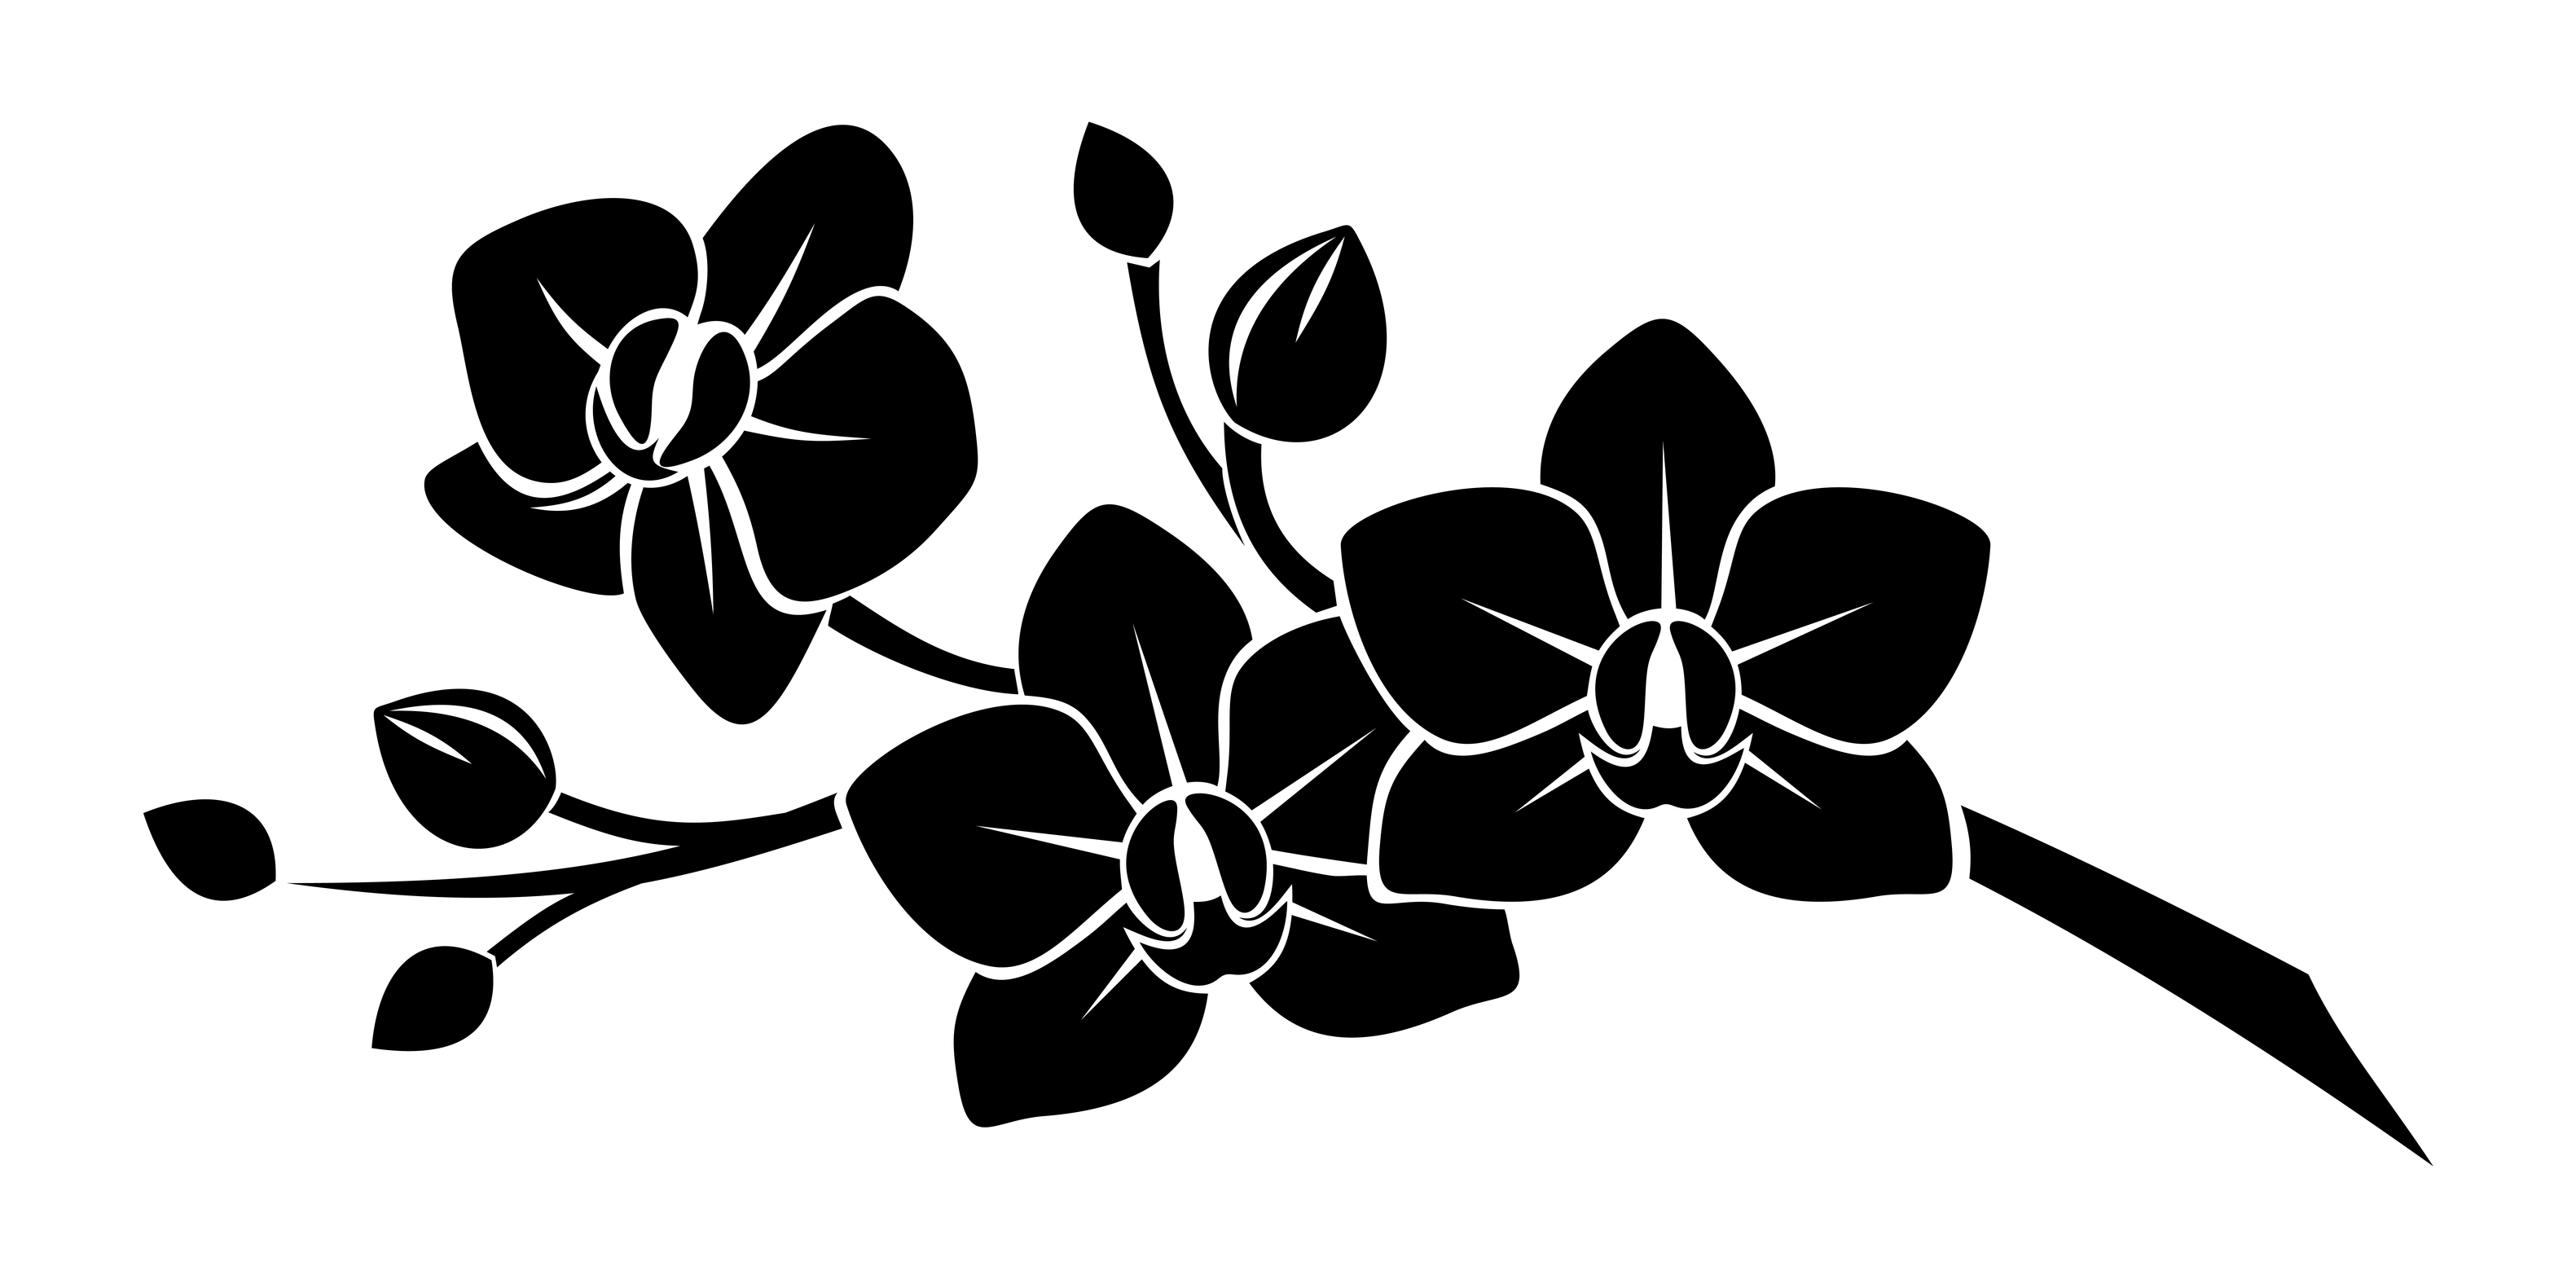 Orchid-tattoo-black-and-white.jpg